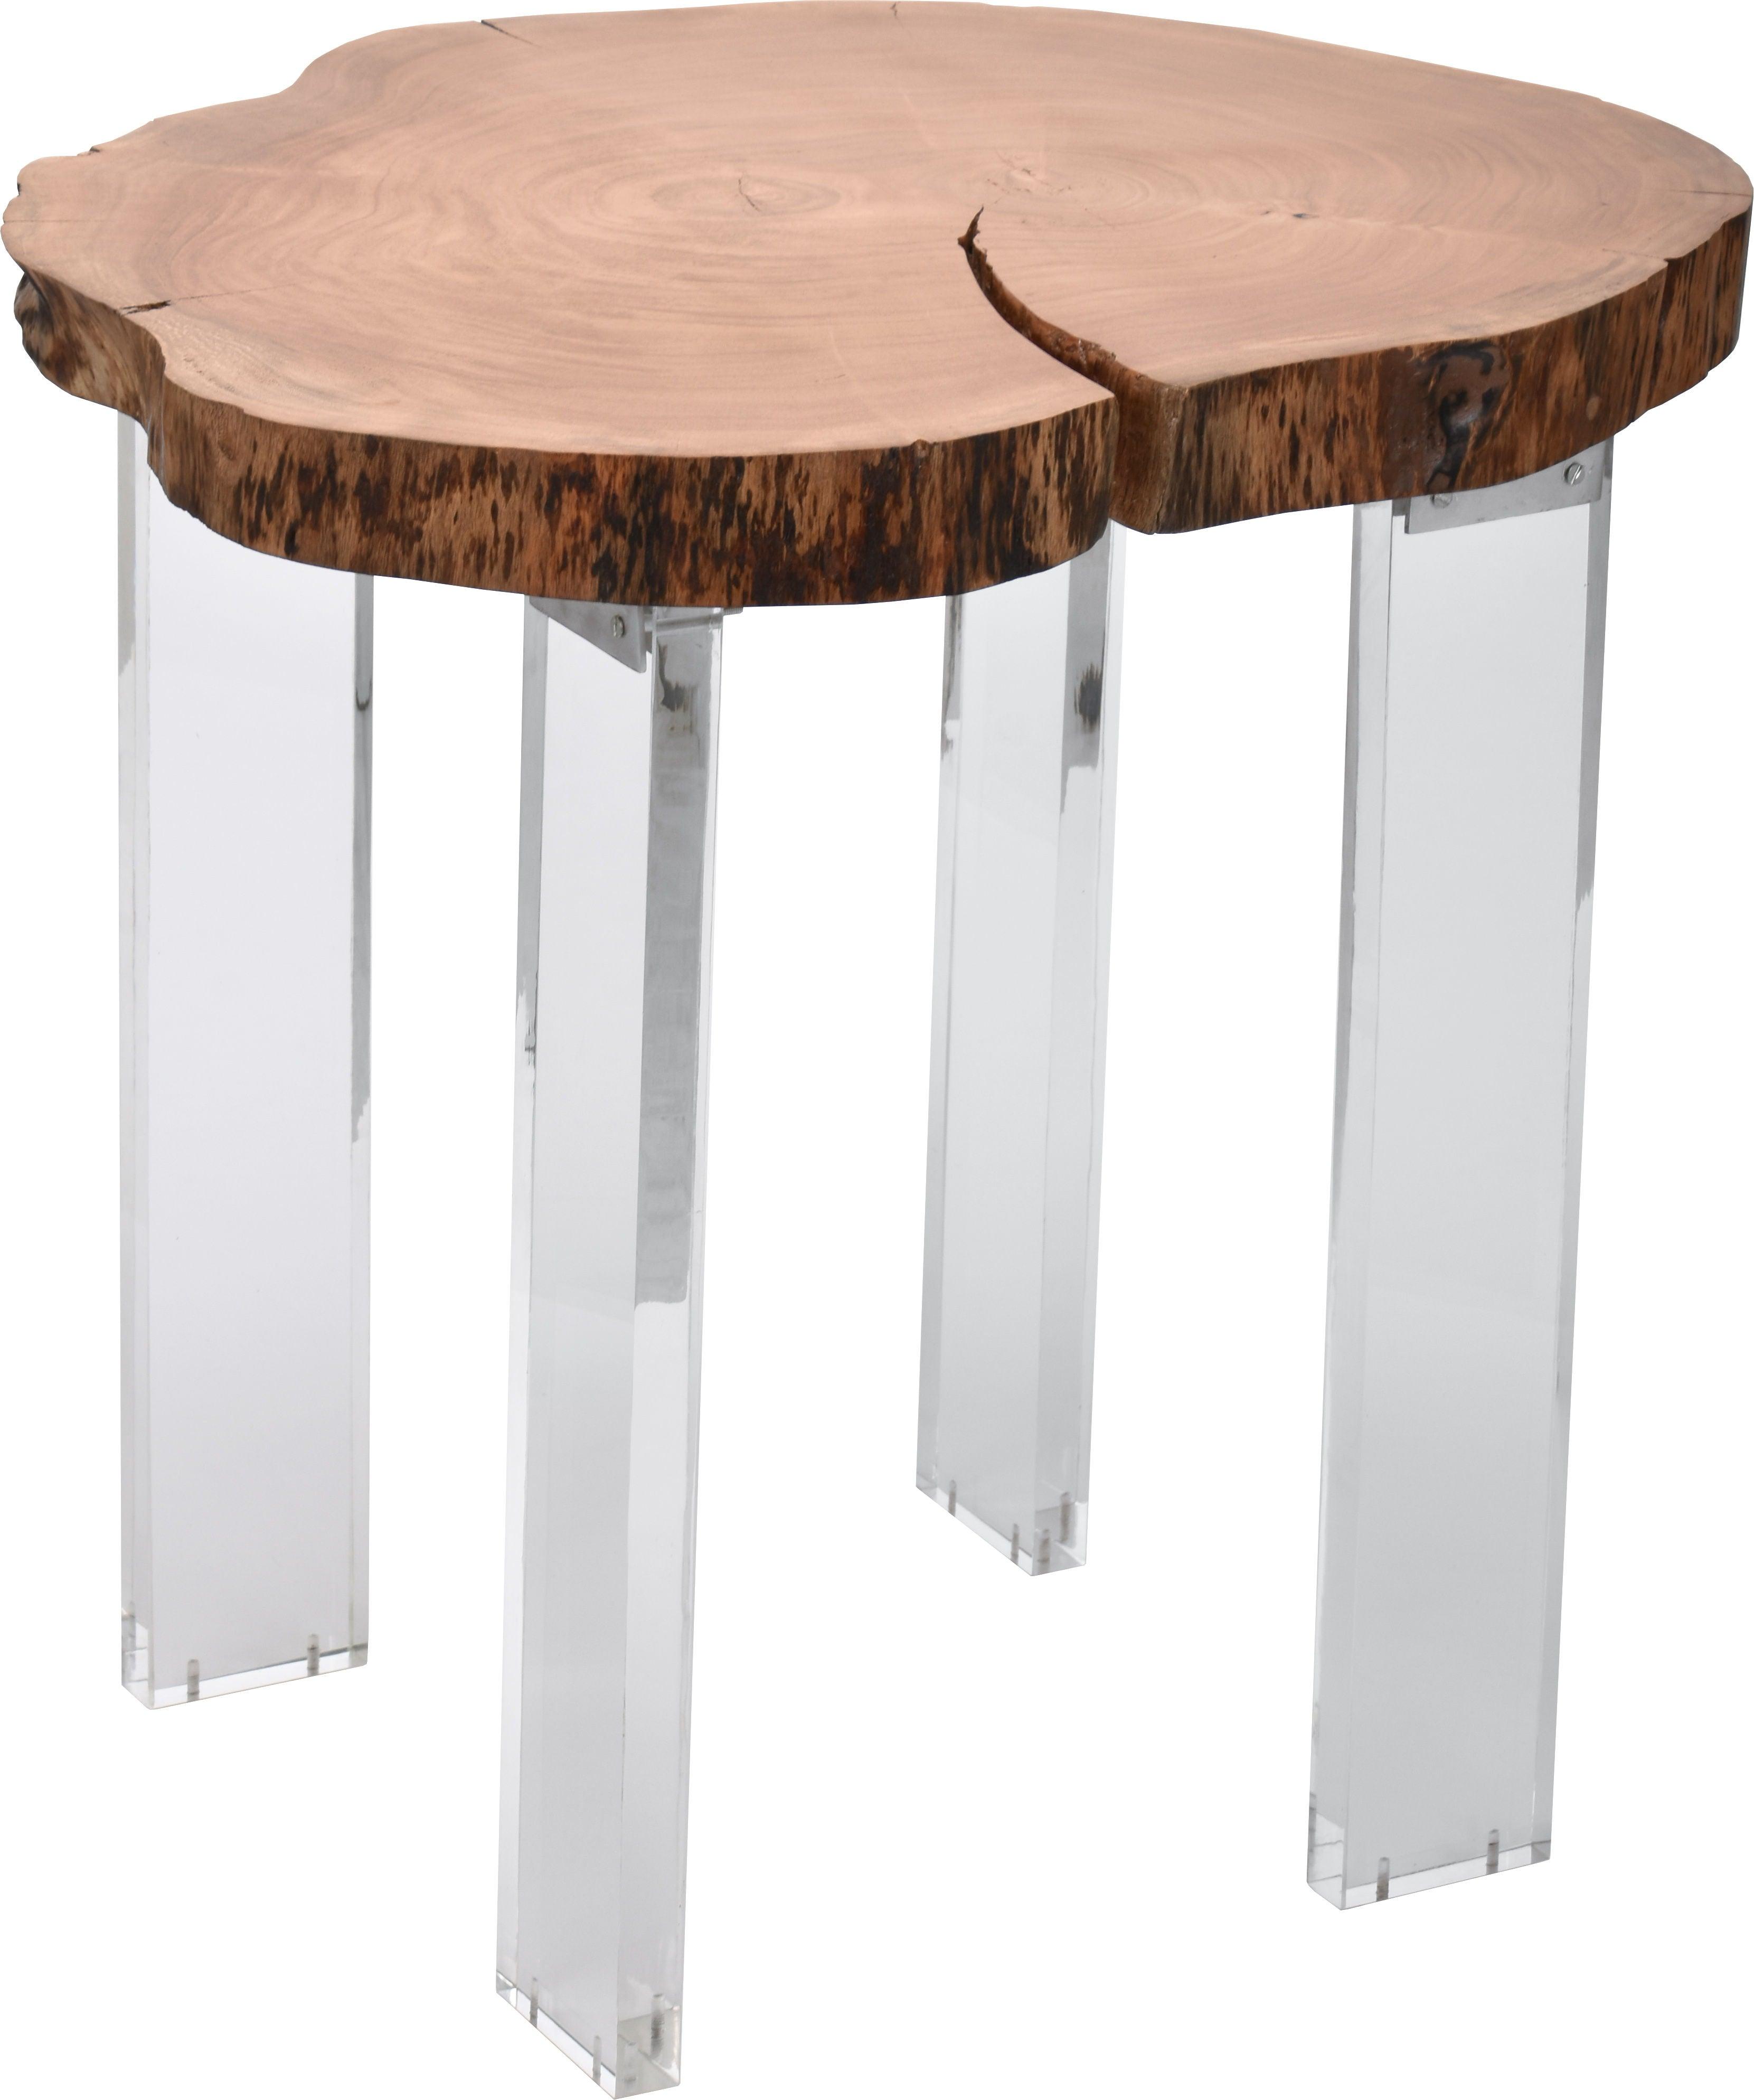 Meridian Furniture - Woodland - End Table - Light Brown - 5th Avenue Furniture